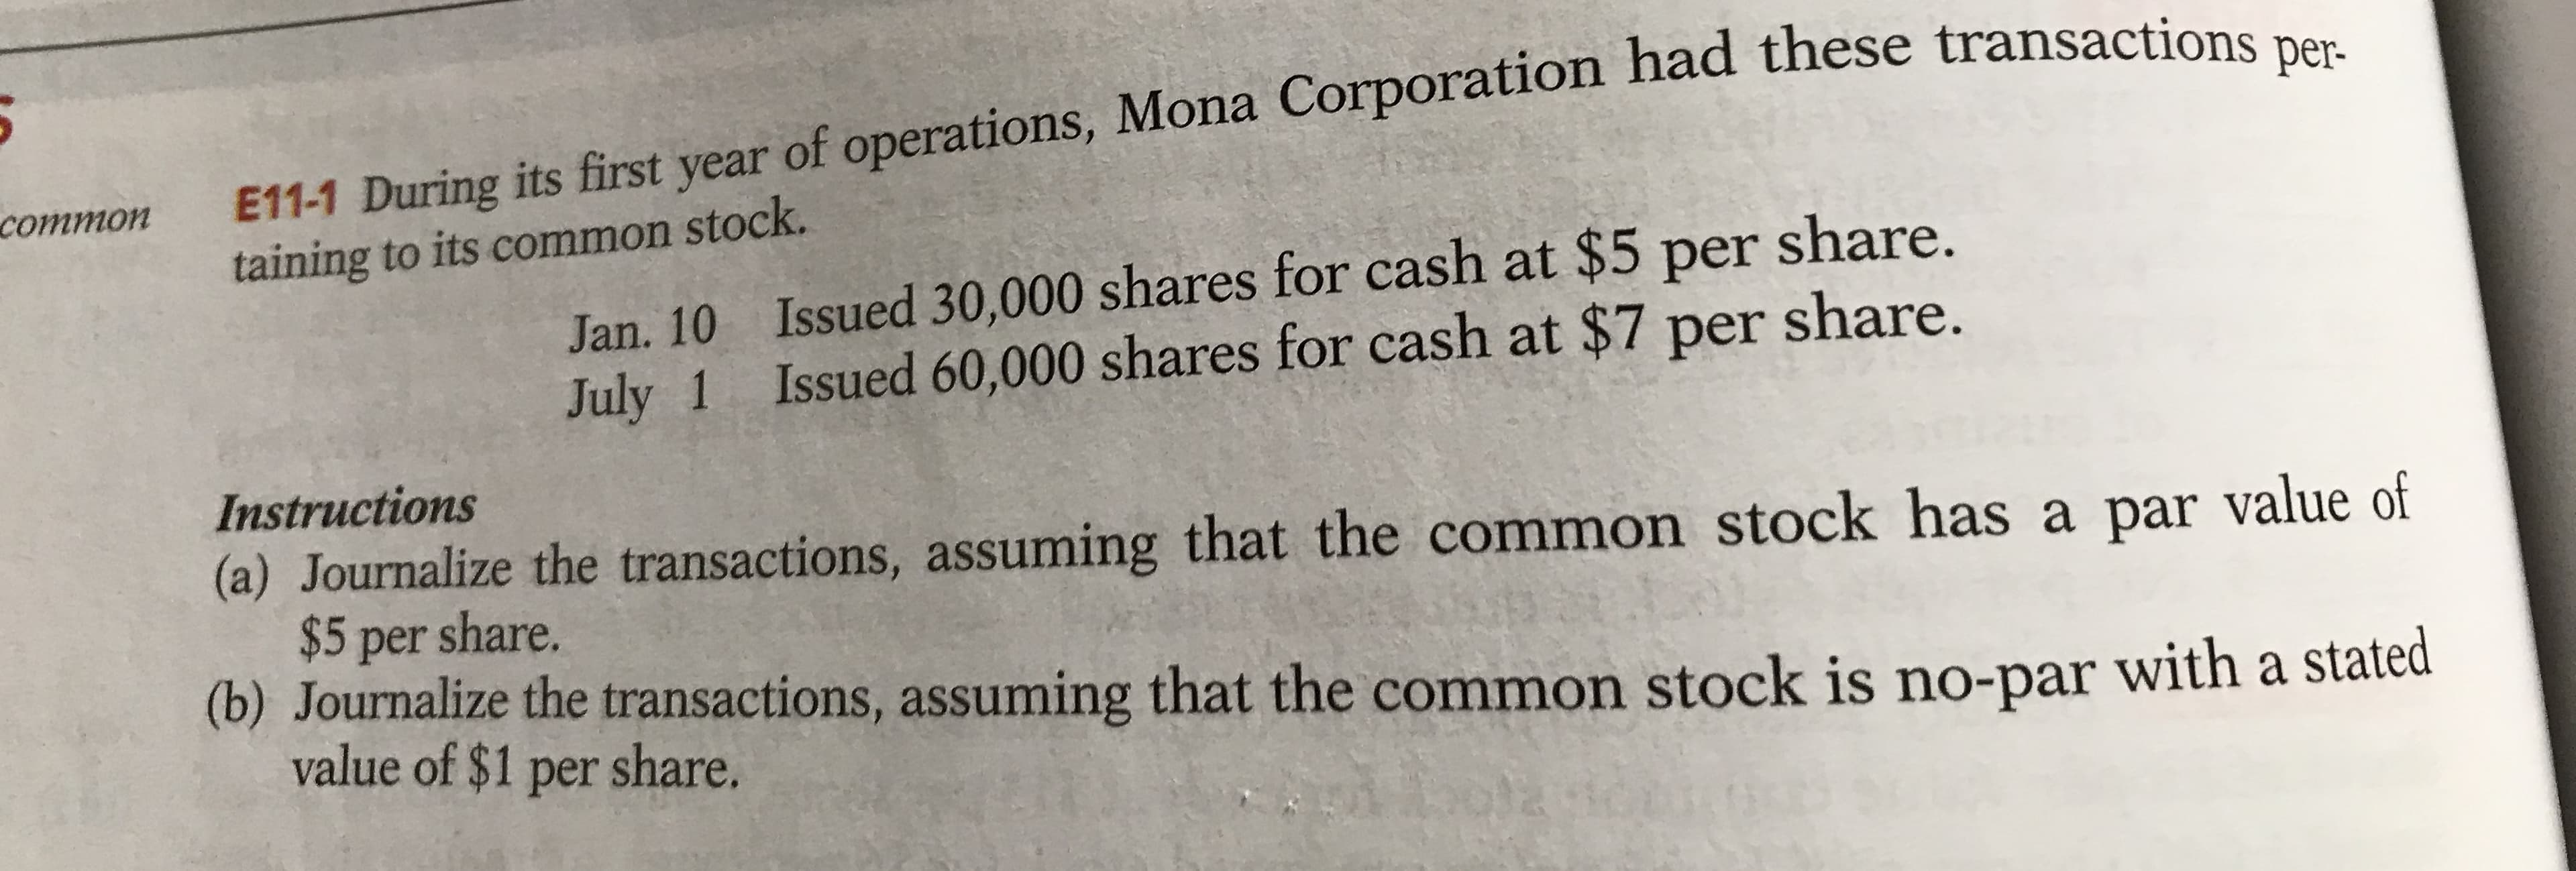 E11-1 During its first year of operations, Mona Corporation had these transactions per-
common
taining to its common stock.
Jan. 10 Issued 30,000 shares for cash at $5 per share.
July 1 Issued 60,000 shares for cash at $7 per share.
Instructions
(a) Journalize the transactions, assuming that the common stock has a par value of
$5 per share.
(b) Journalize the transactions, assuming that the common stock is no-par
value of $1 per share.
with a stated
